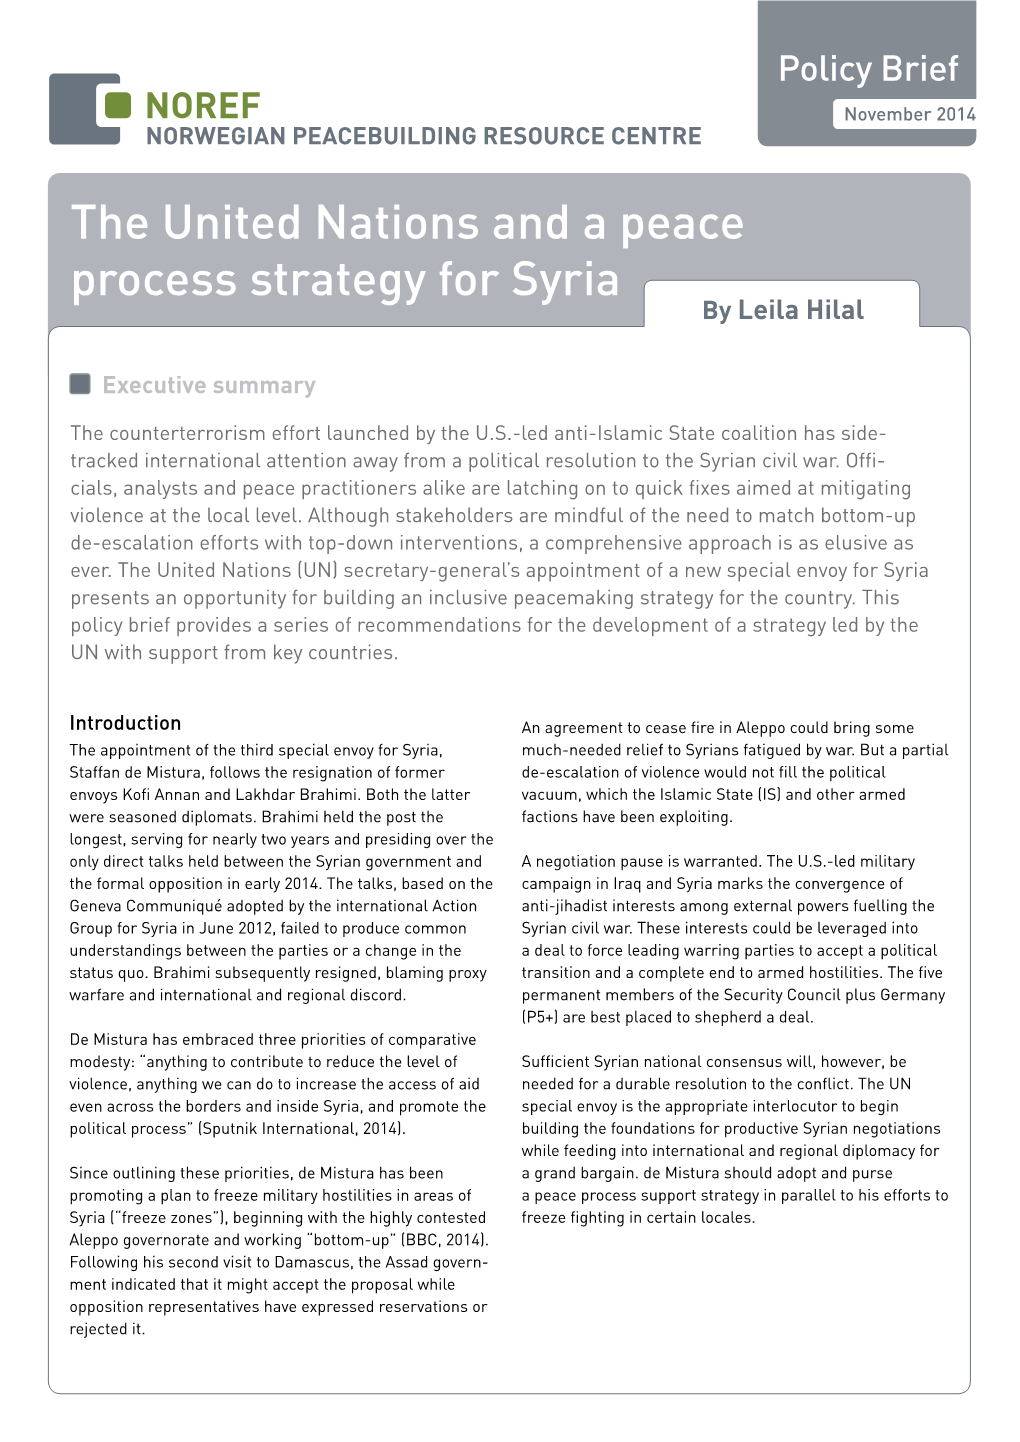 The United Nations and a Peace Process Strategy for Syria by Leila Hilal